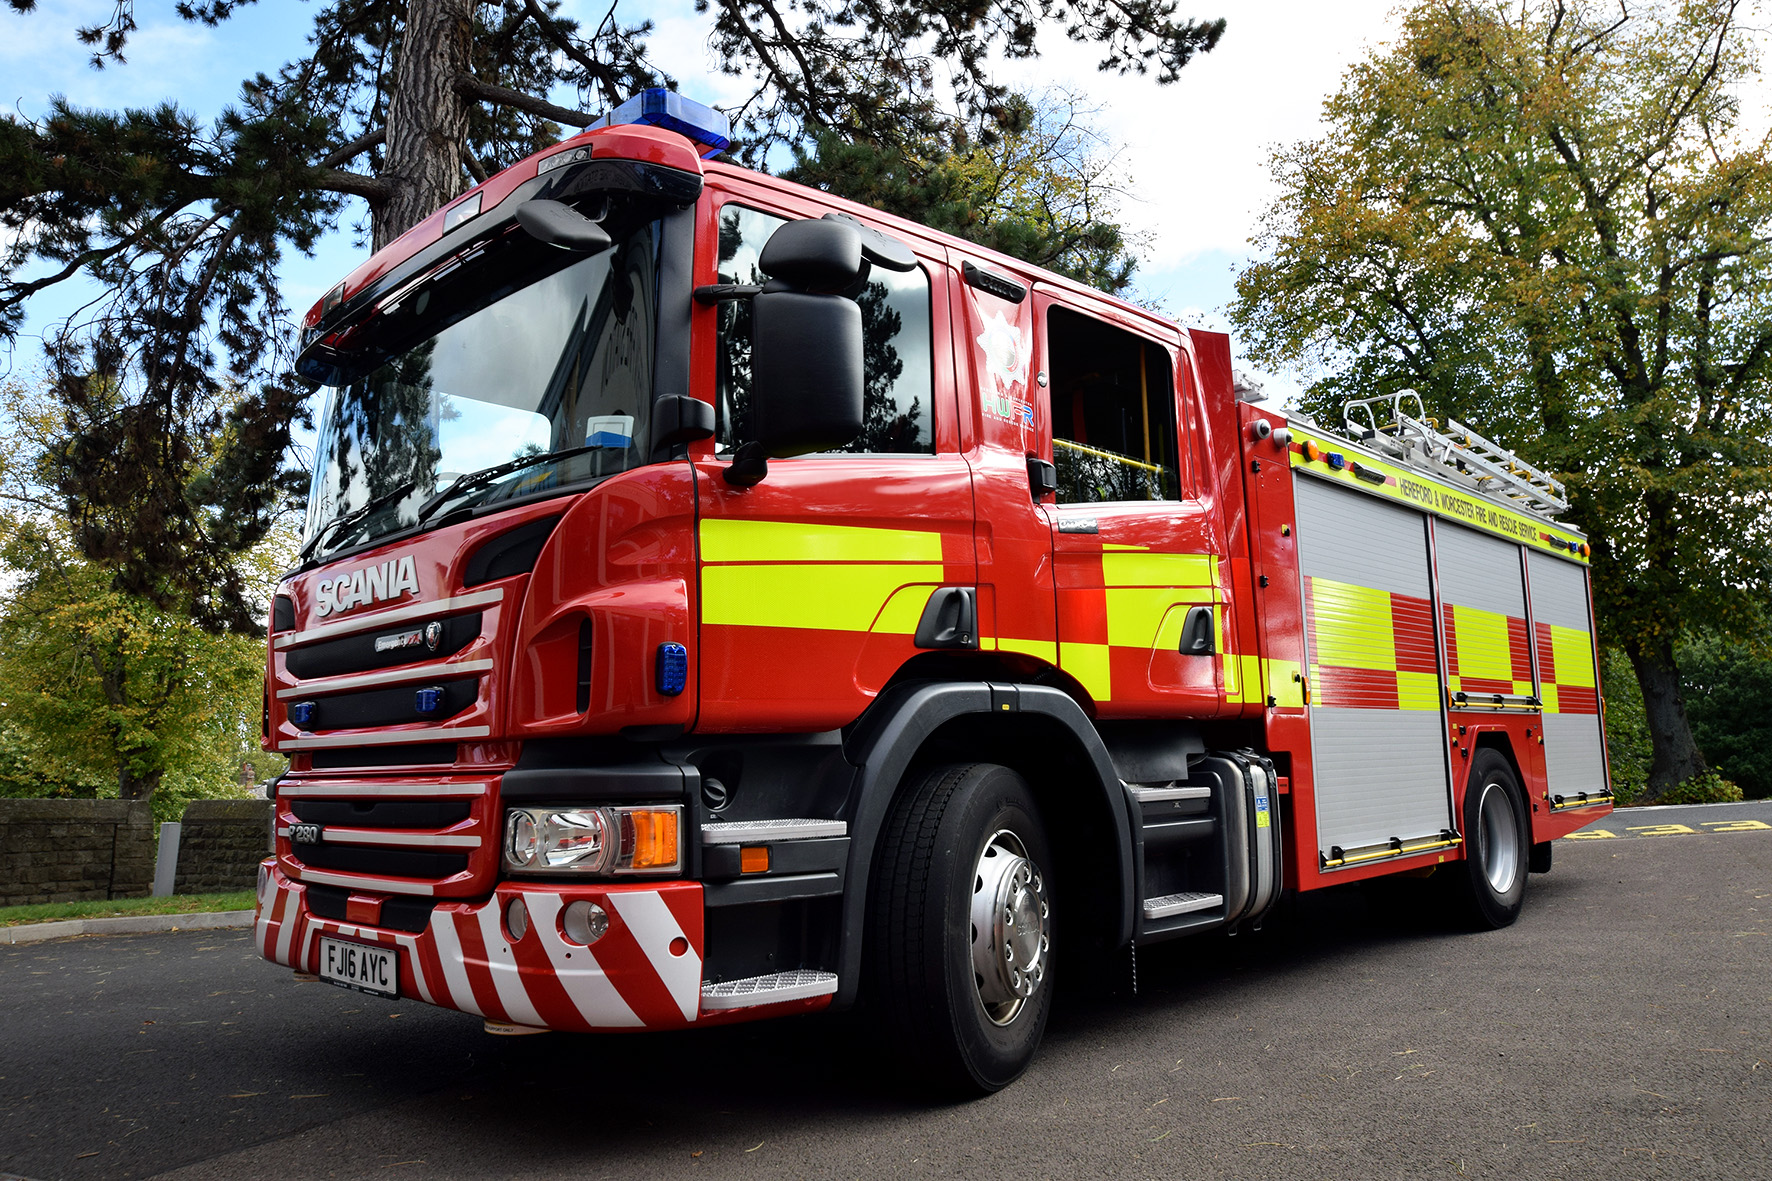 NEWS | Fire crews called to fire at property in Withington